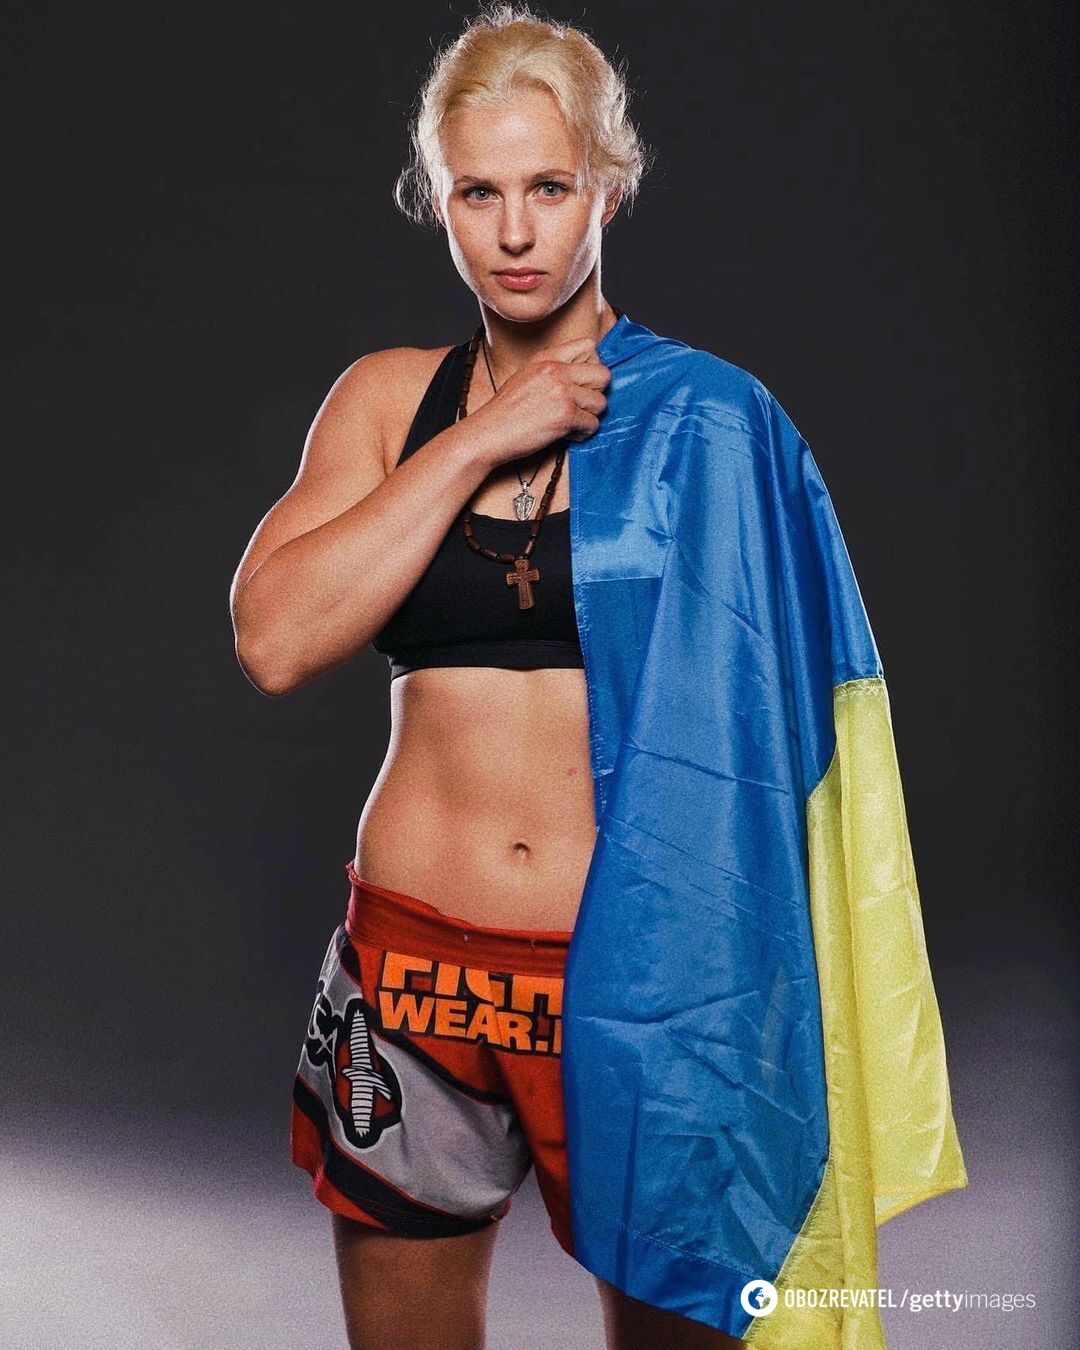 Ukrainian boxing champion knocked out in the US in 14 seconds with her first punch. Video